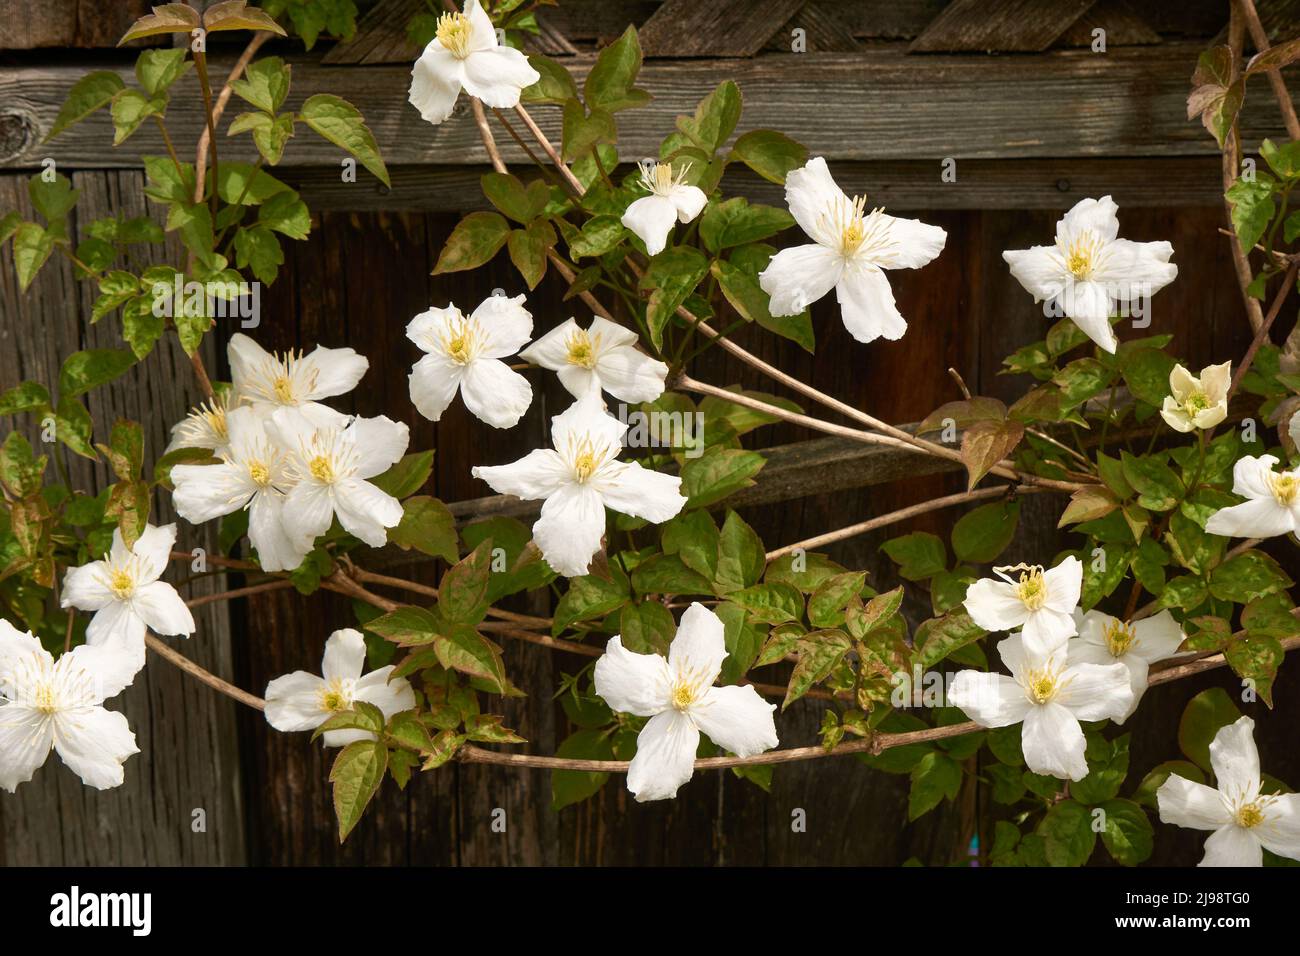 White clematis flowering vine climbing along a wooden fence in spring Stock Photo